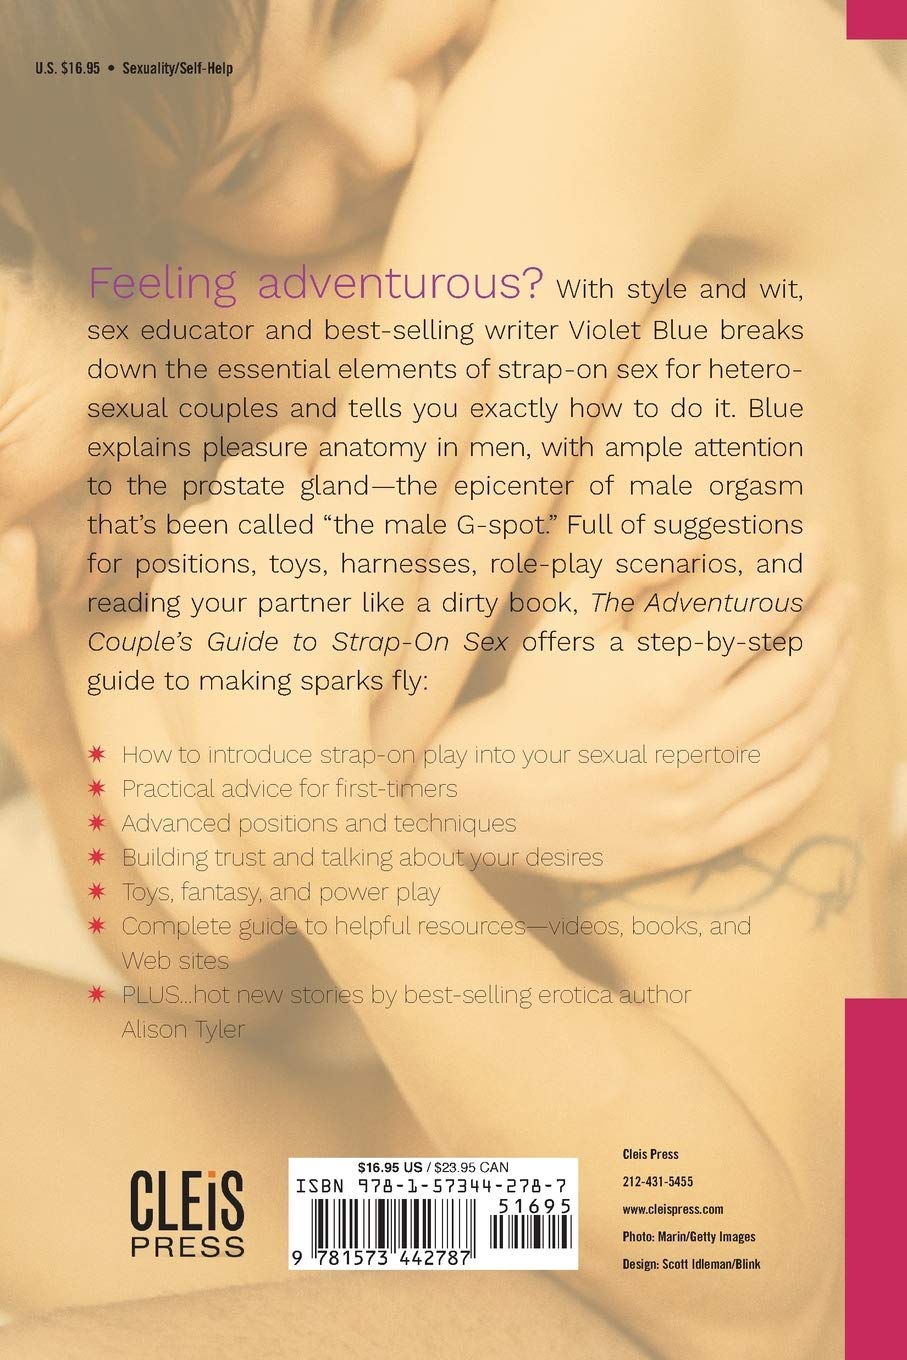 The back cover of The Adventurous Couple's Guide to Strap-On Sex by Violet Blue.